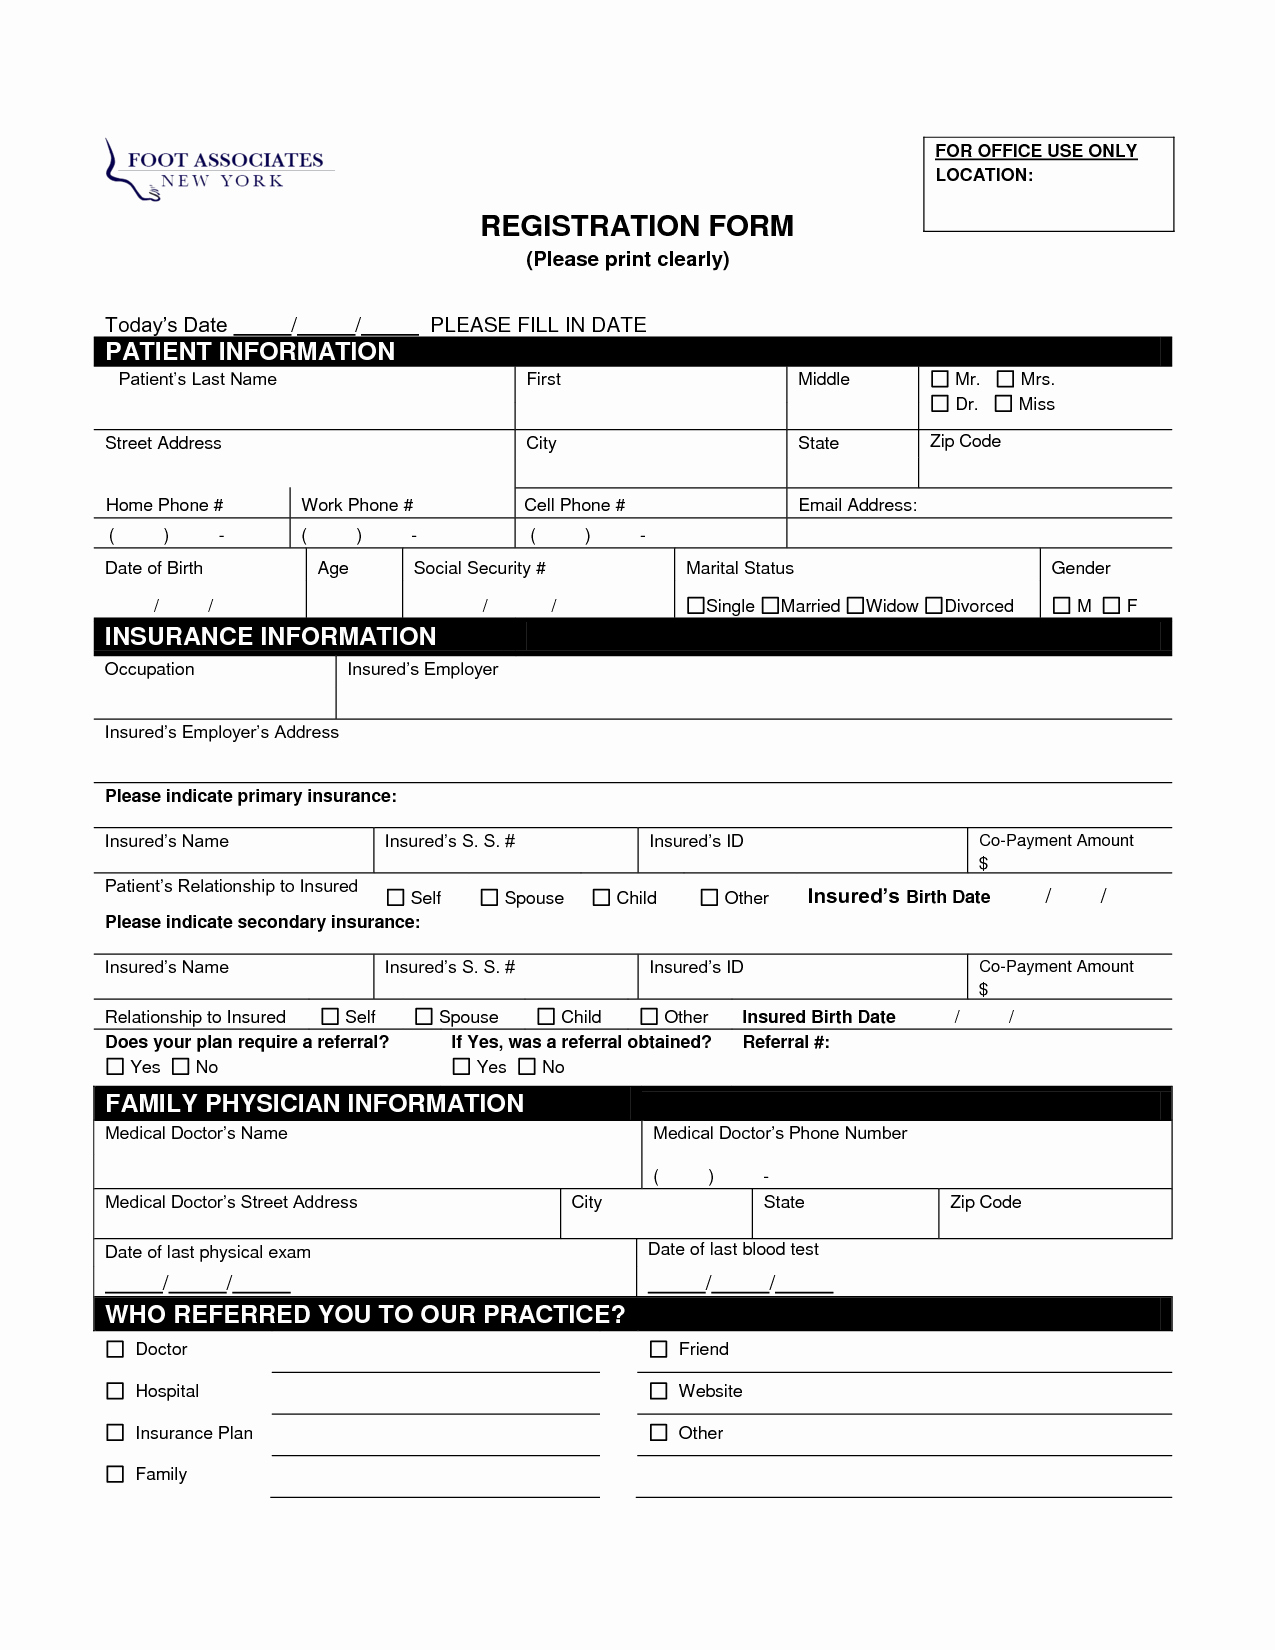 post sample medical office forms